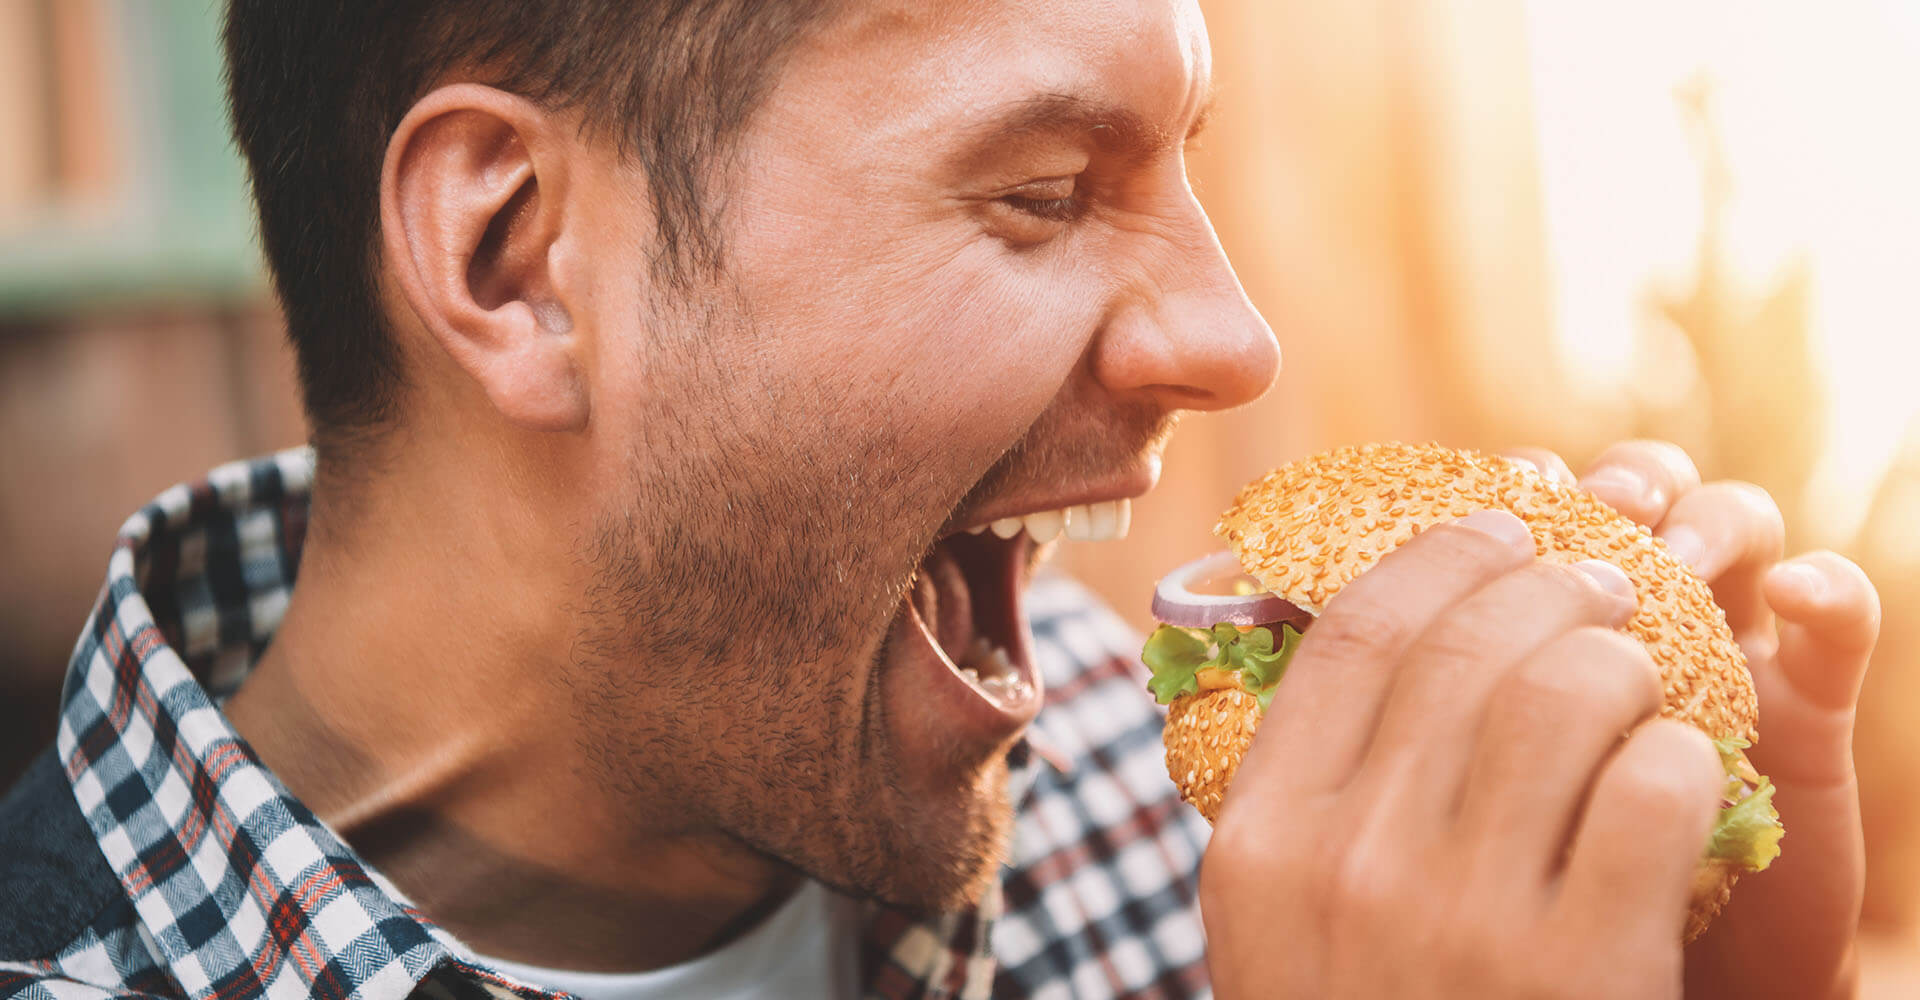 Man with obvious ravenous appetite is about to bite into a large burger